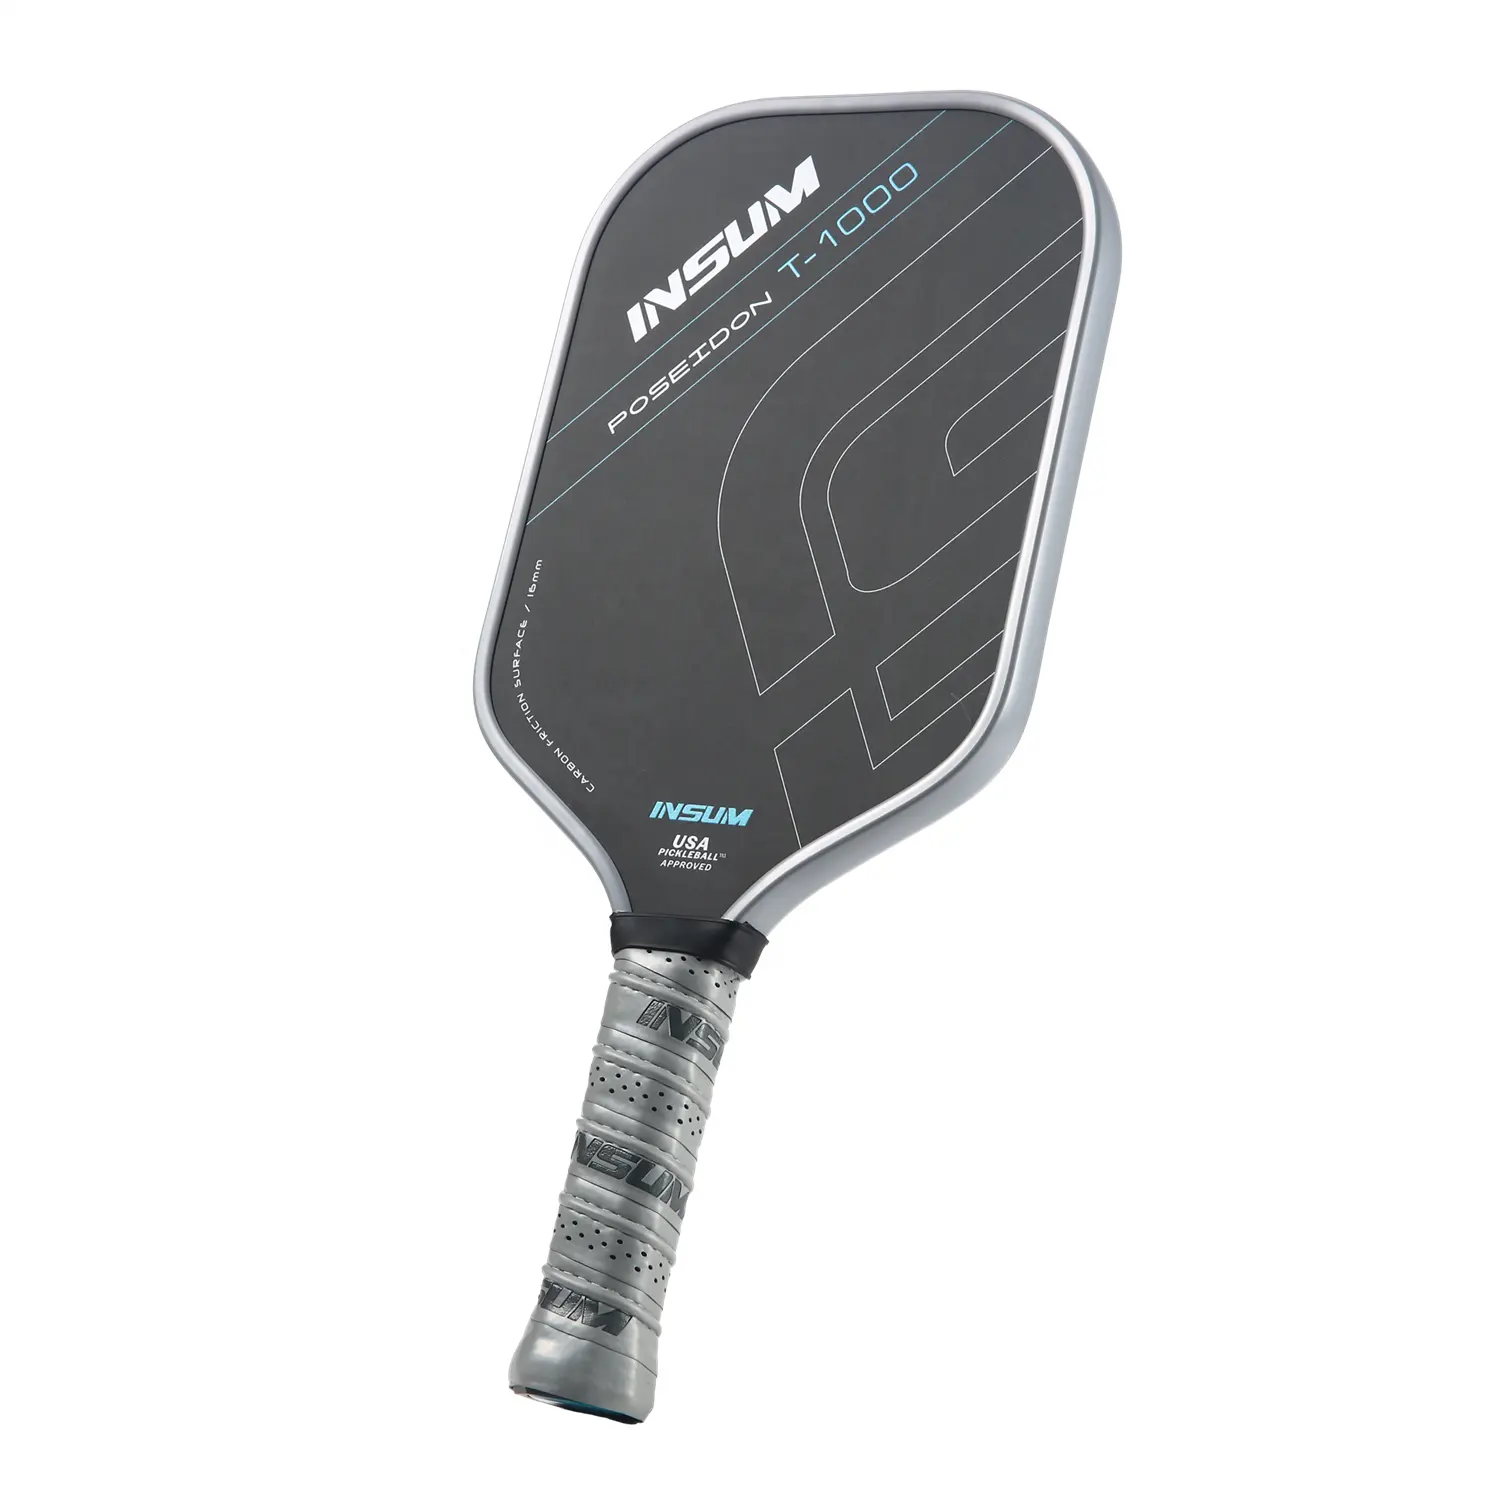 AMA SPORT Top Quality USAPA Pickleball Paddle with Textured Carbon Grip Surface Elongated Handle Maximum Spin